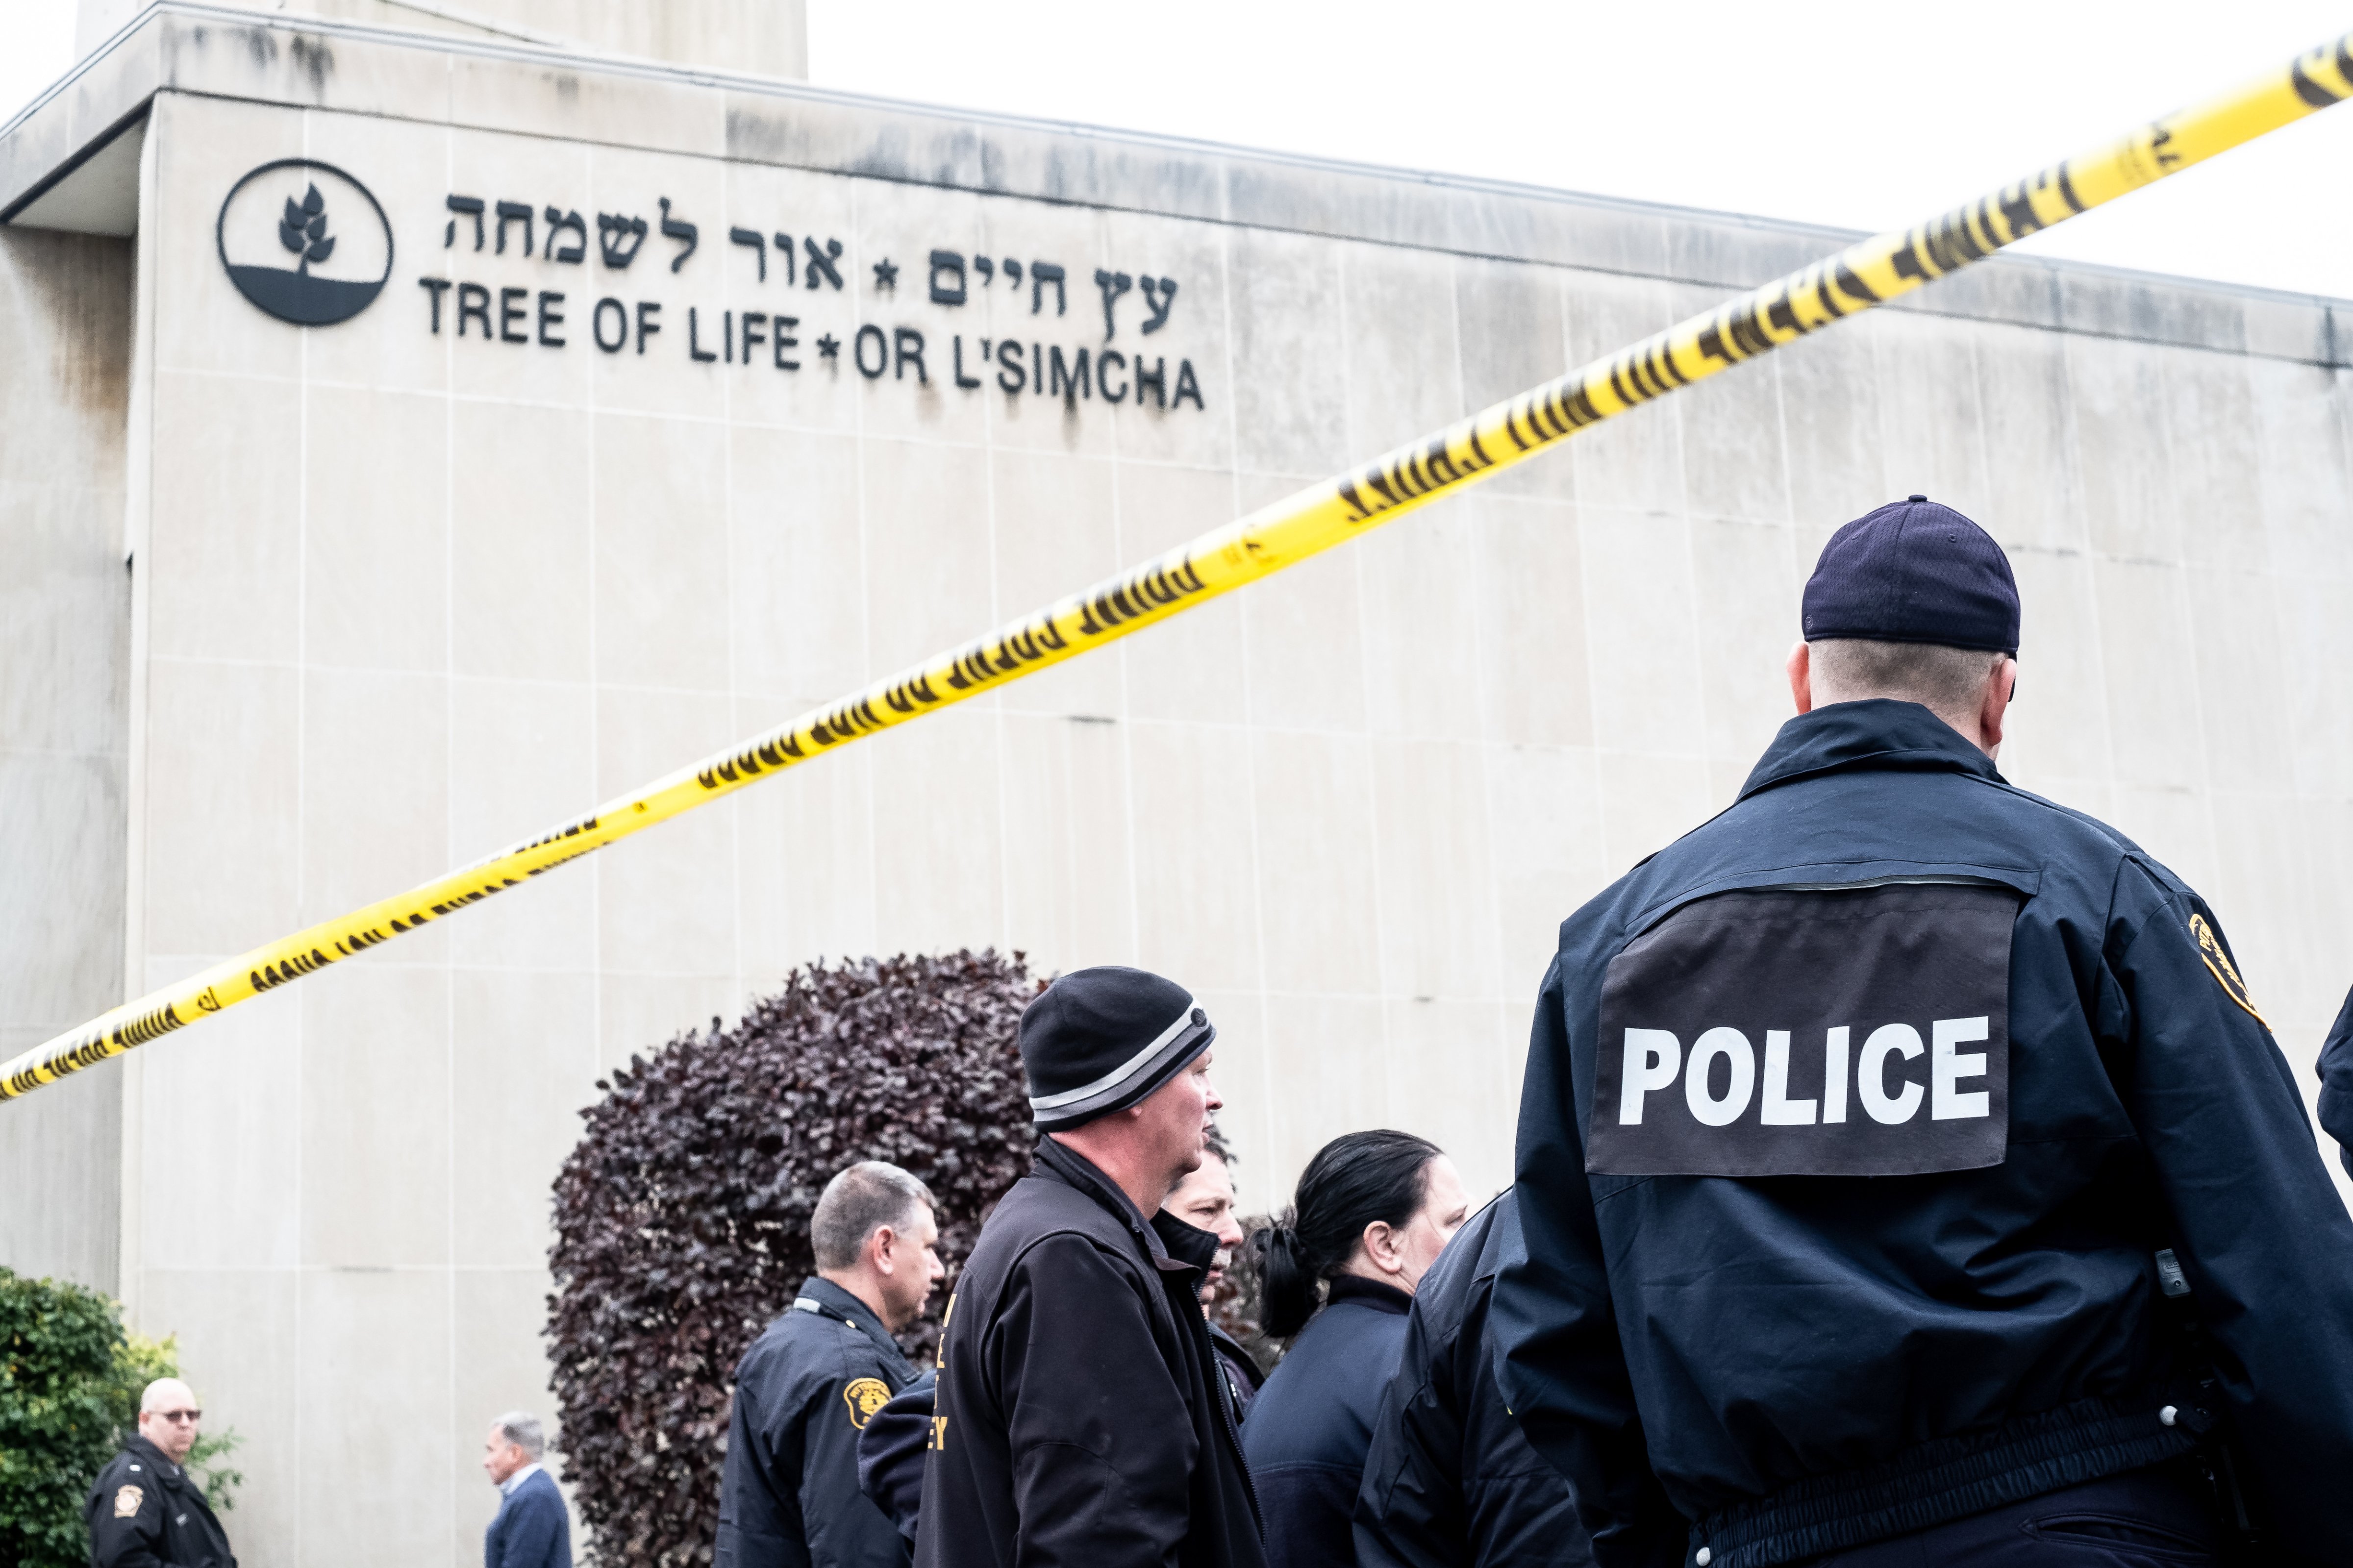 PITTSBURGH, PA, UNITED STATES - 2018/10/27: Police seen in front of synagogue.
                      Aftermath of the mass shooting at the Tree of Life Synagogue in Squirrel Hill, Pittsburgh, PA.  While much tragedy struck the neighborhood, many people from the whole city physically came together and many from around the world showed their support. (Photo by (Aaron Jackendoff—SOPA Images/Getty Images)